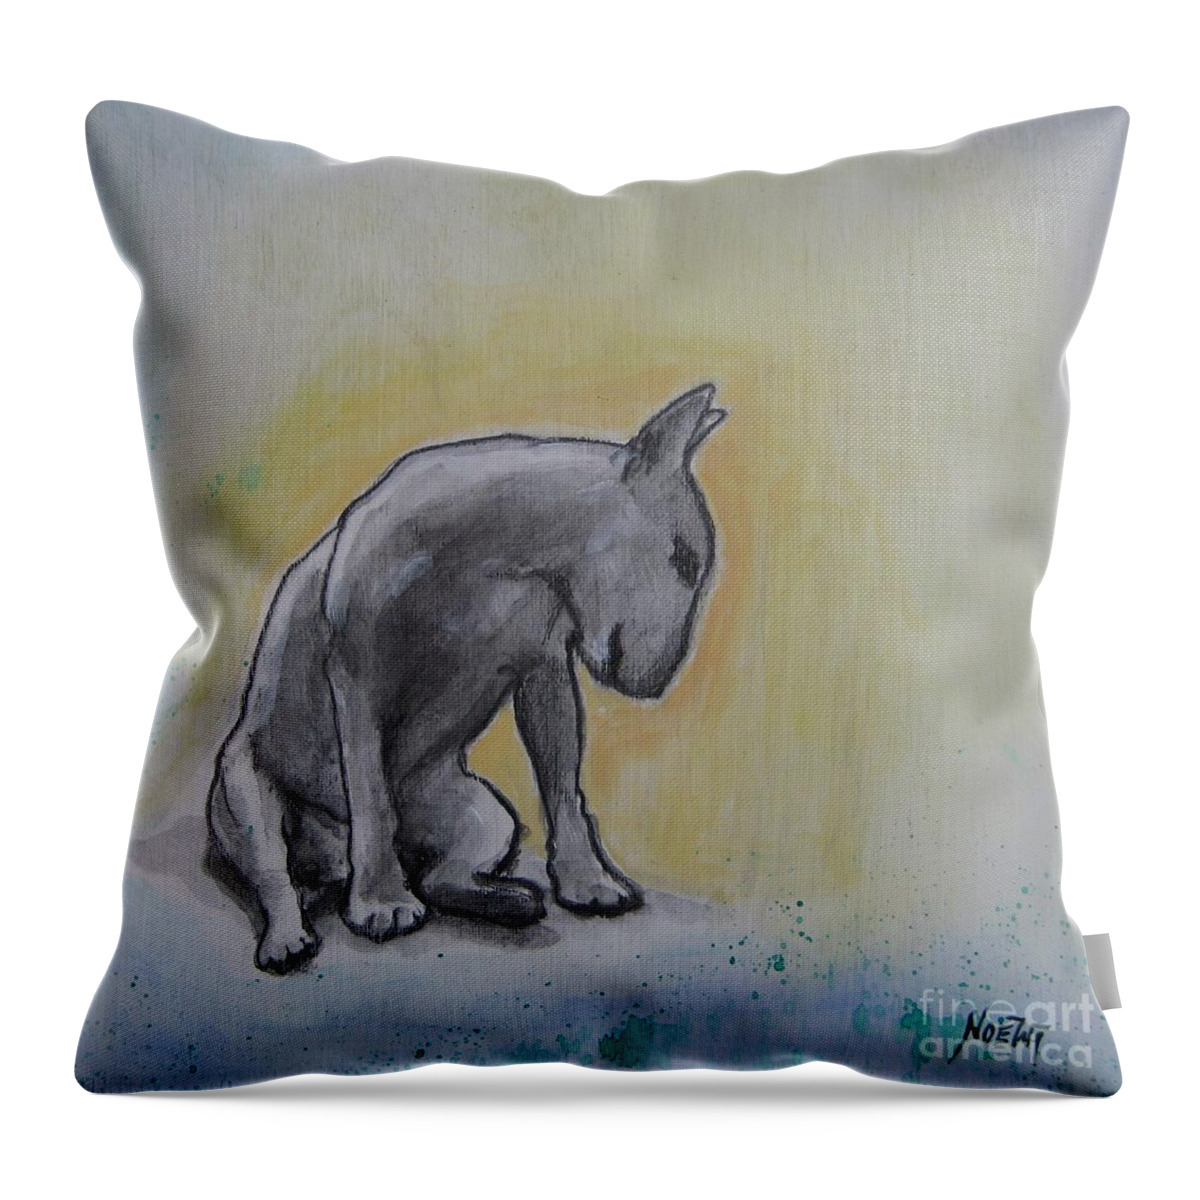 Noewi Throw Pillow featuring the painting The Thinker by Jindra Noewi